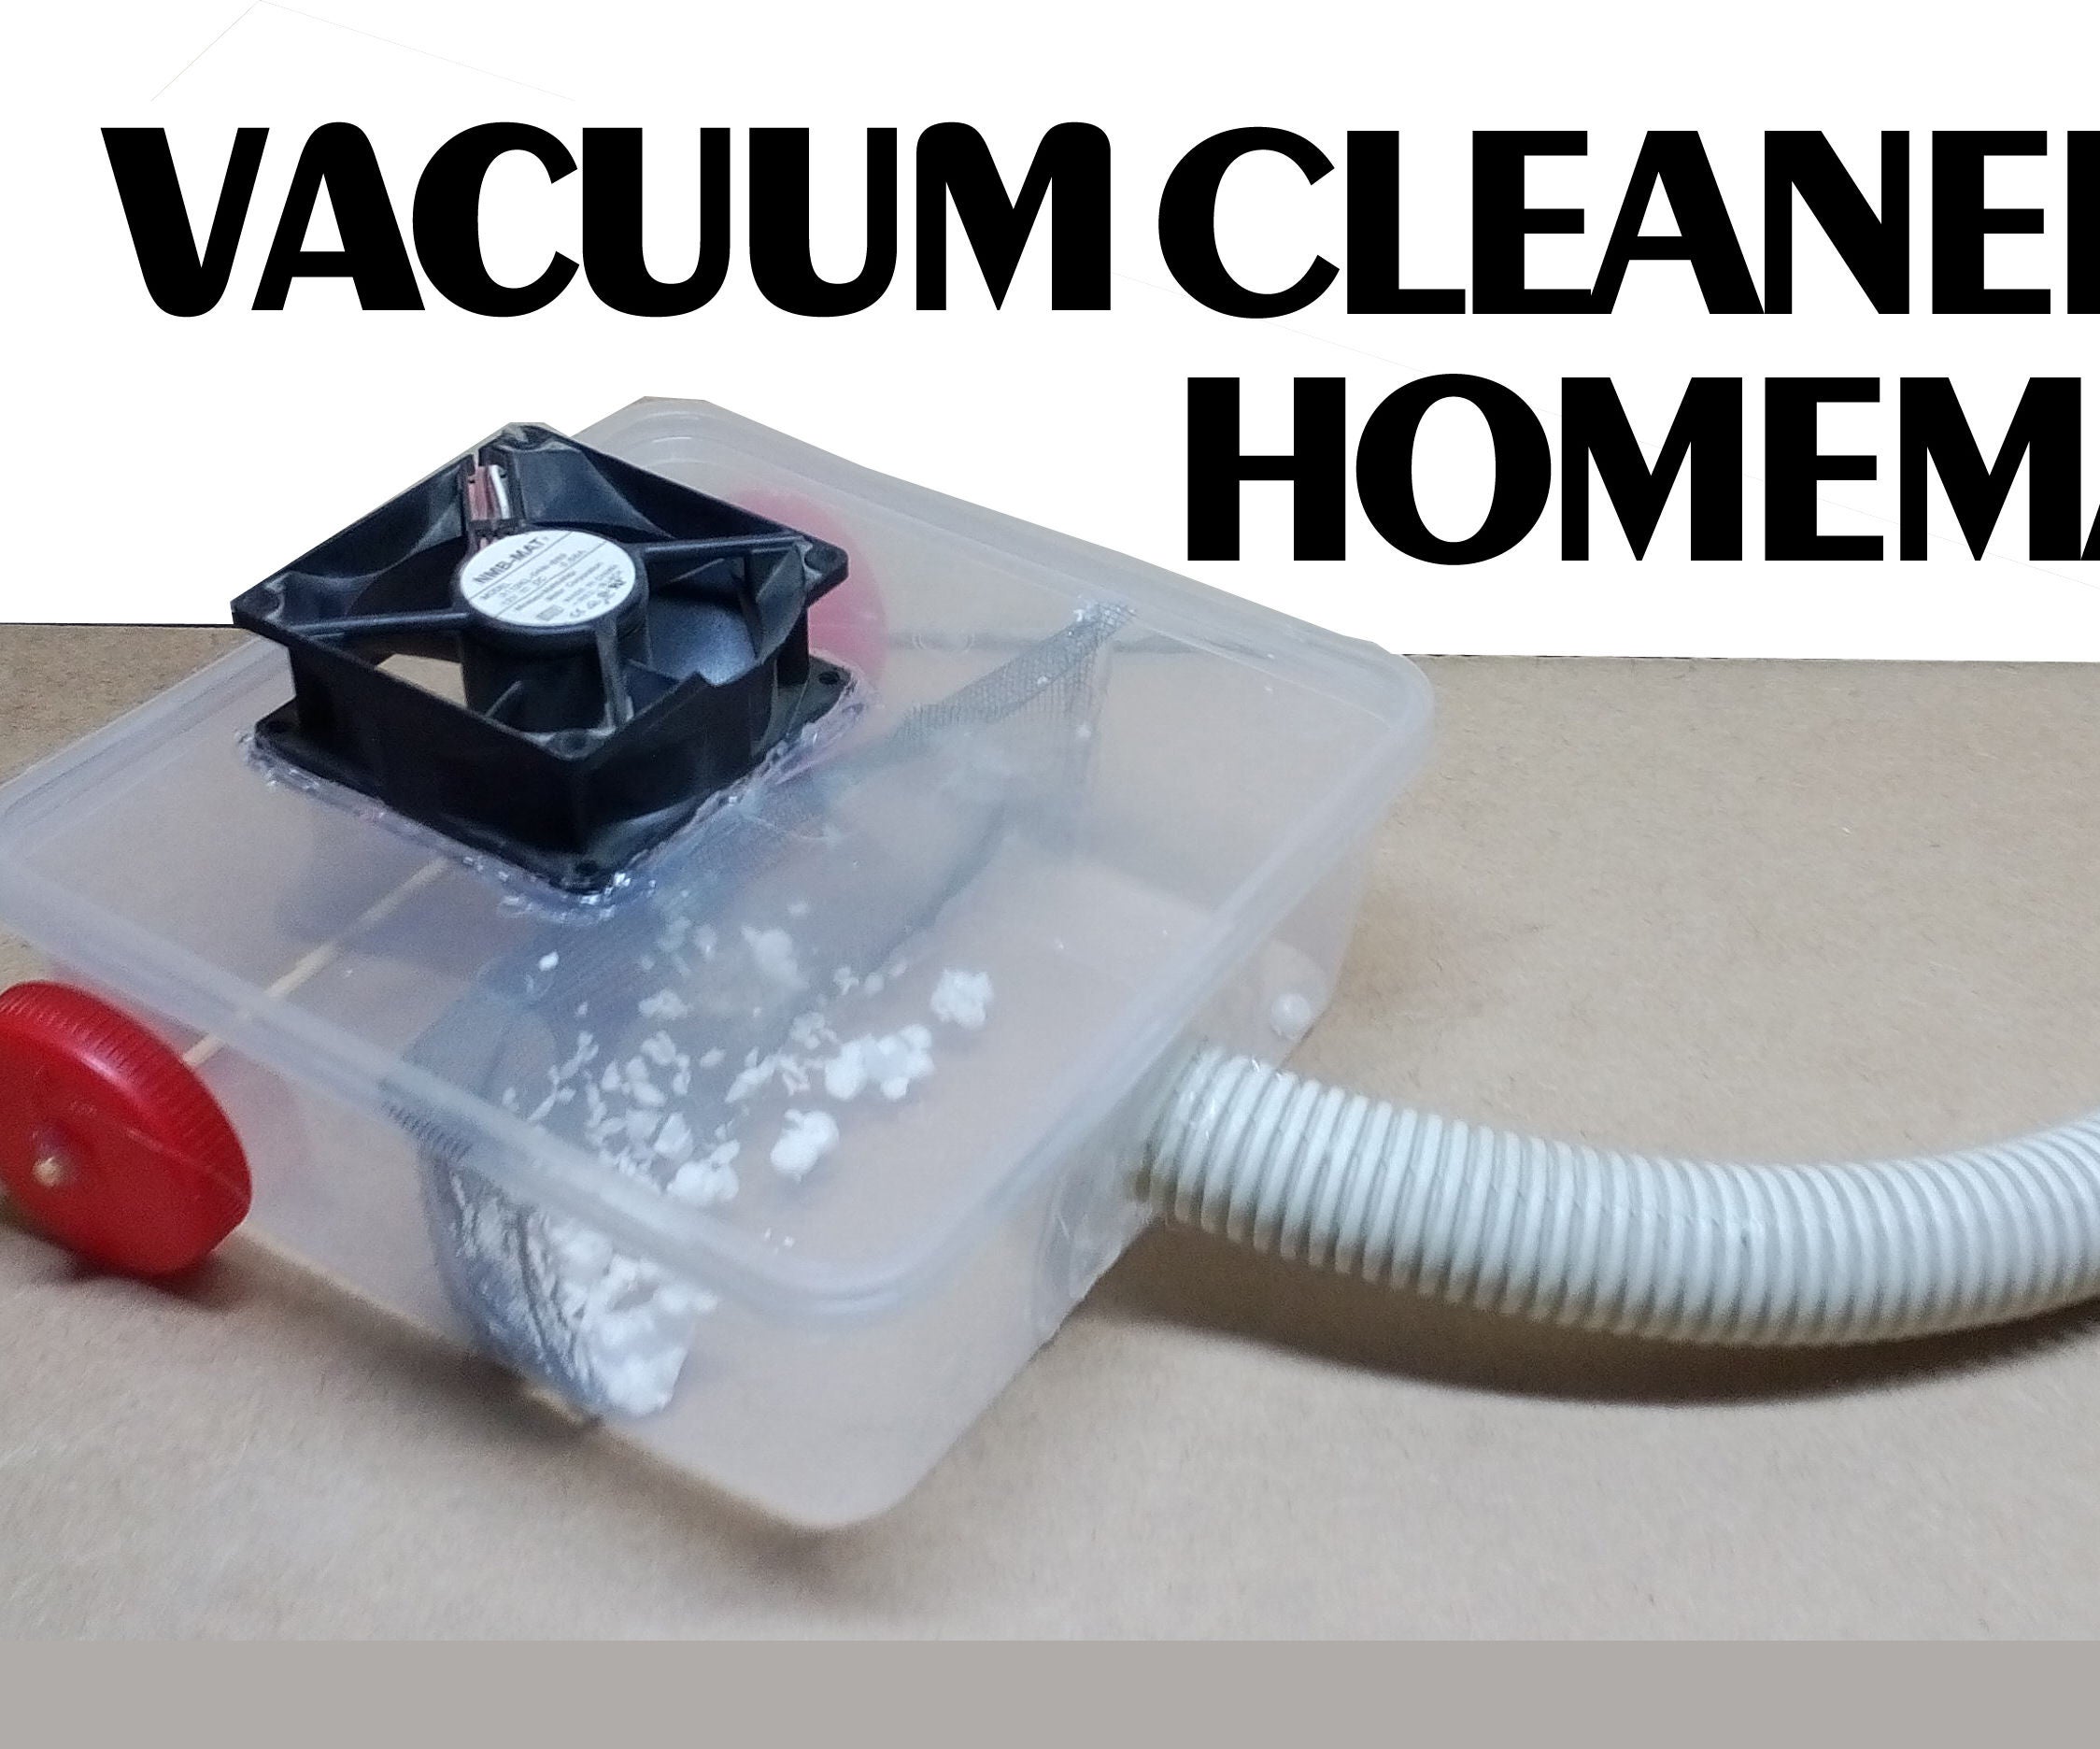 How to Make Vacuum Cleaner